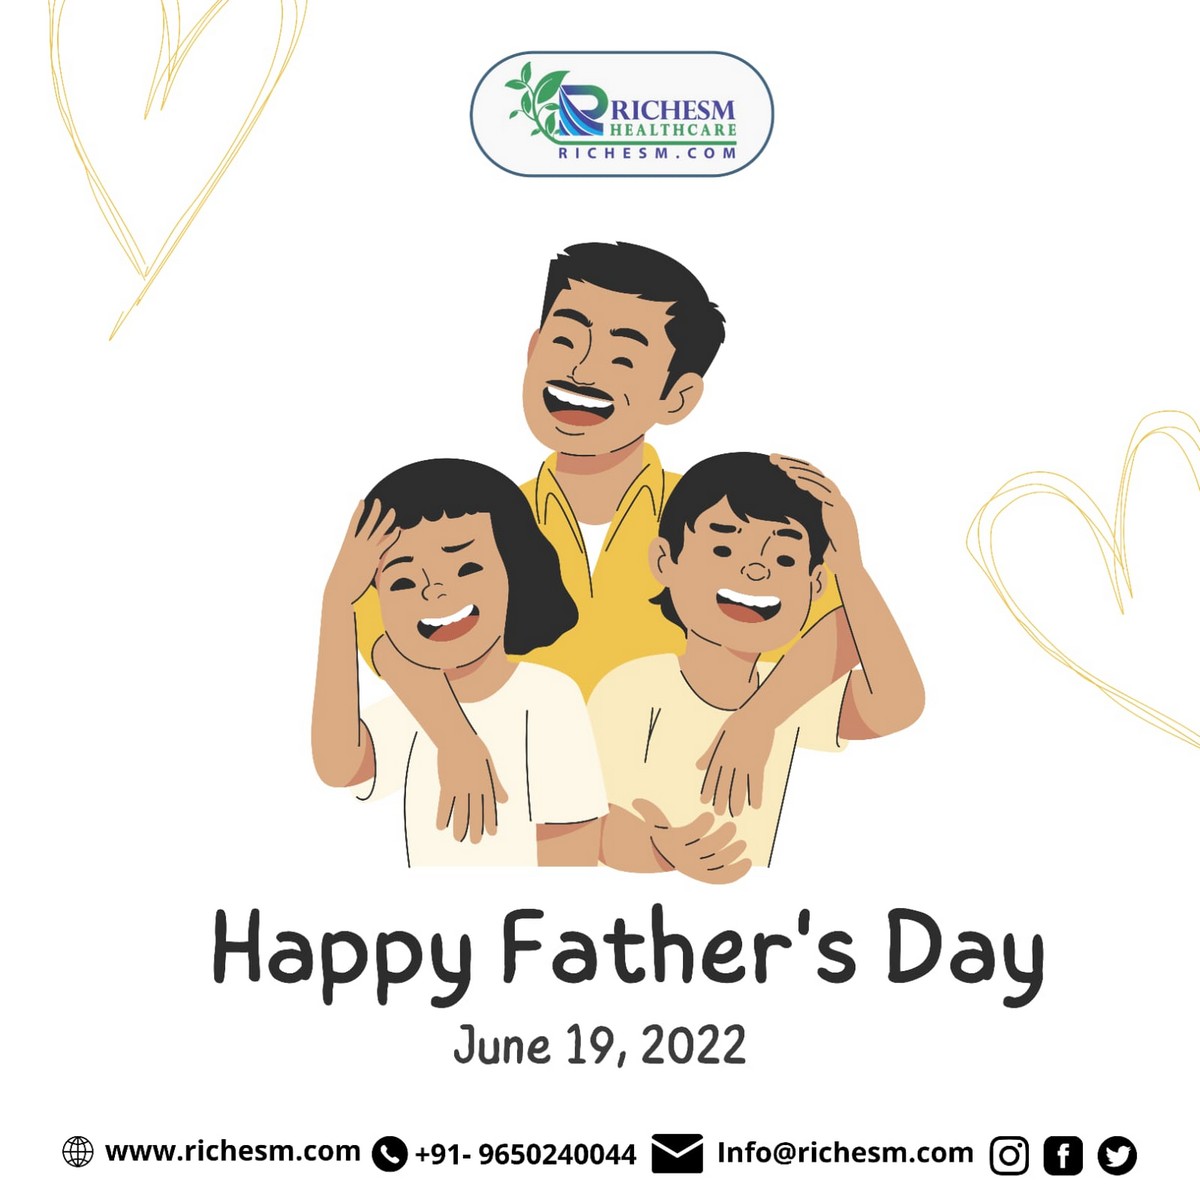 A Very Happy Fathers Day Wishes To All Of You From RichesM